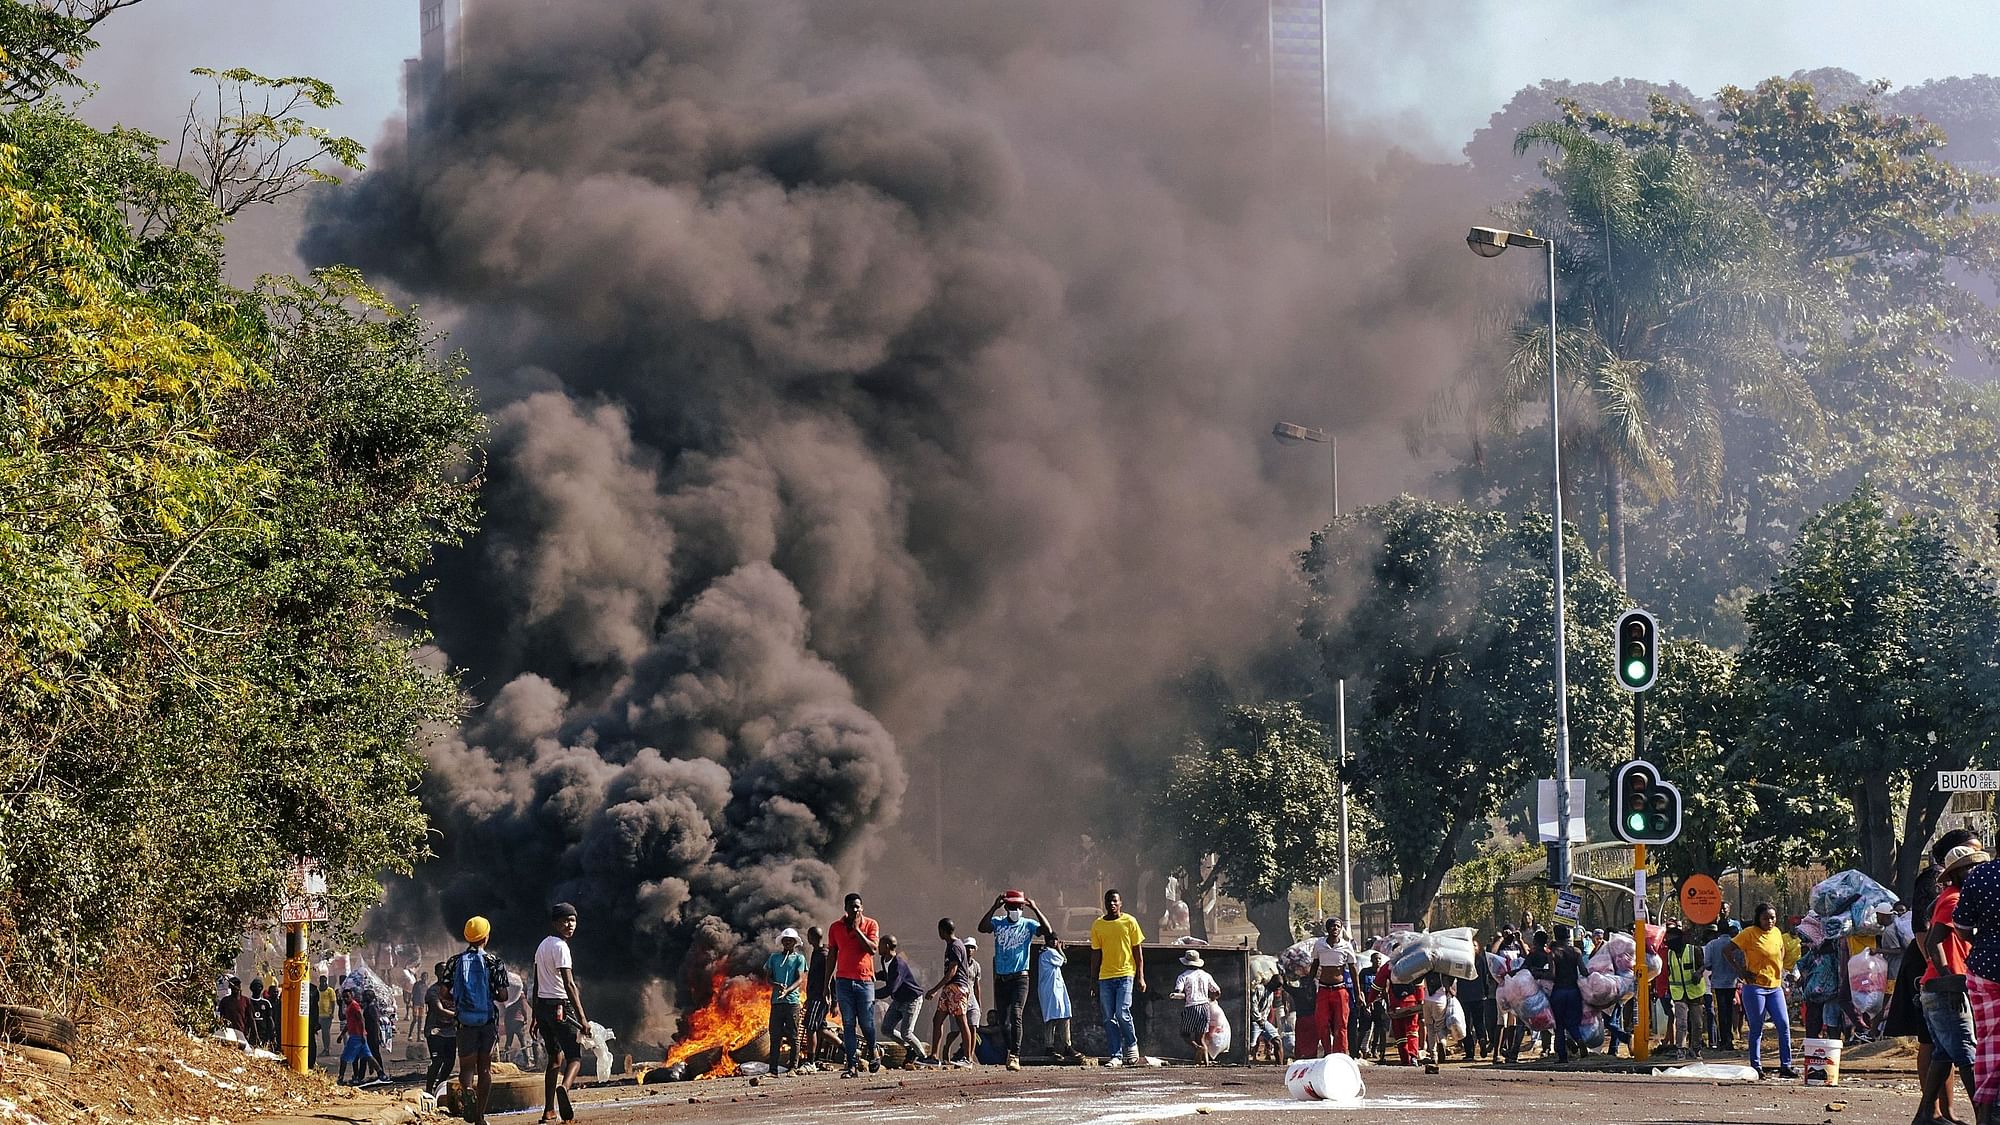 <div class="paragraphs"><p>Looters outside a shopping centre alongside a burning barricade in Durban, South Africa on Monday, 12 July.</p></div>